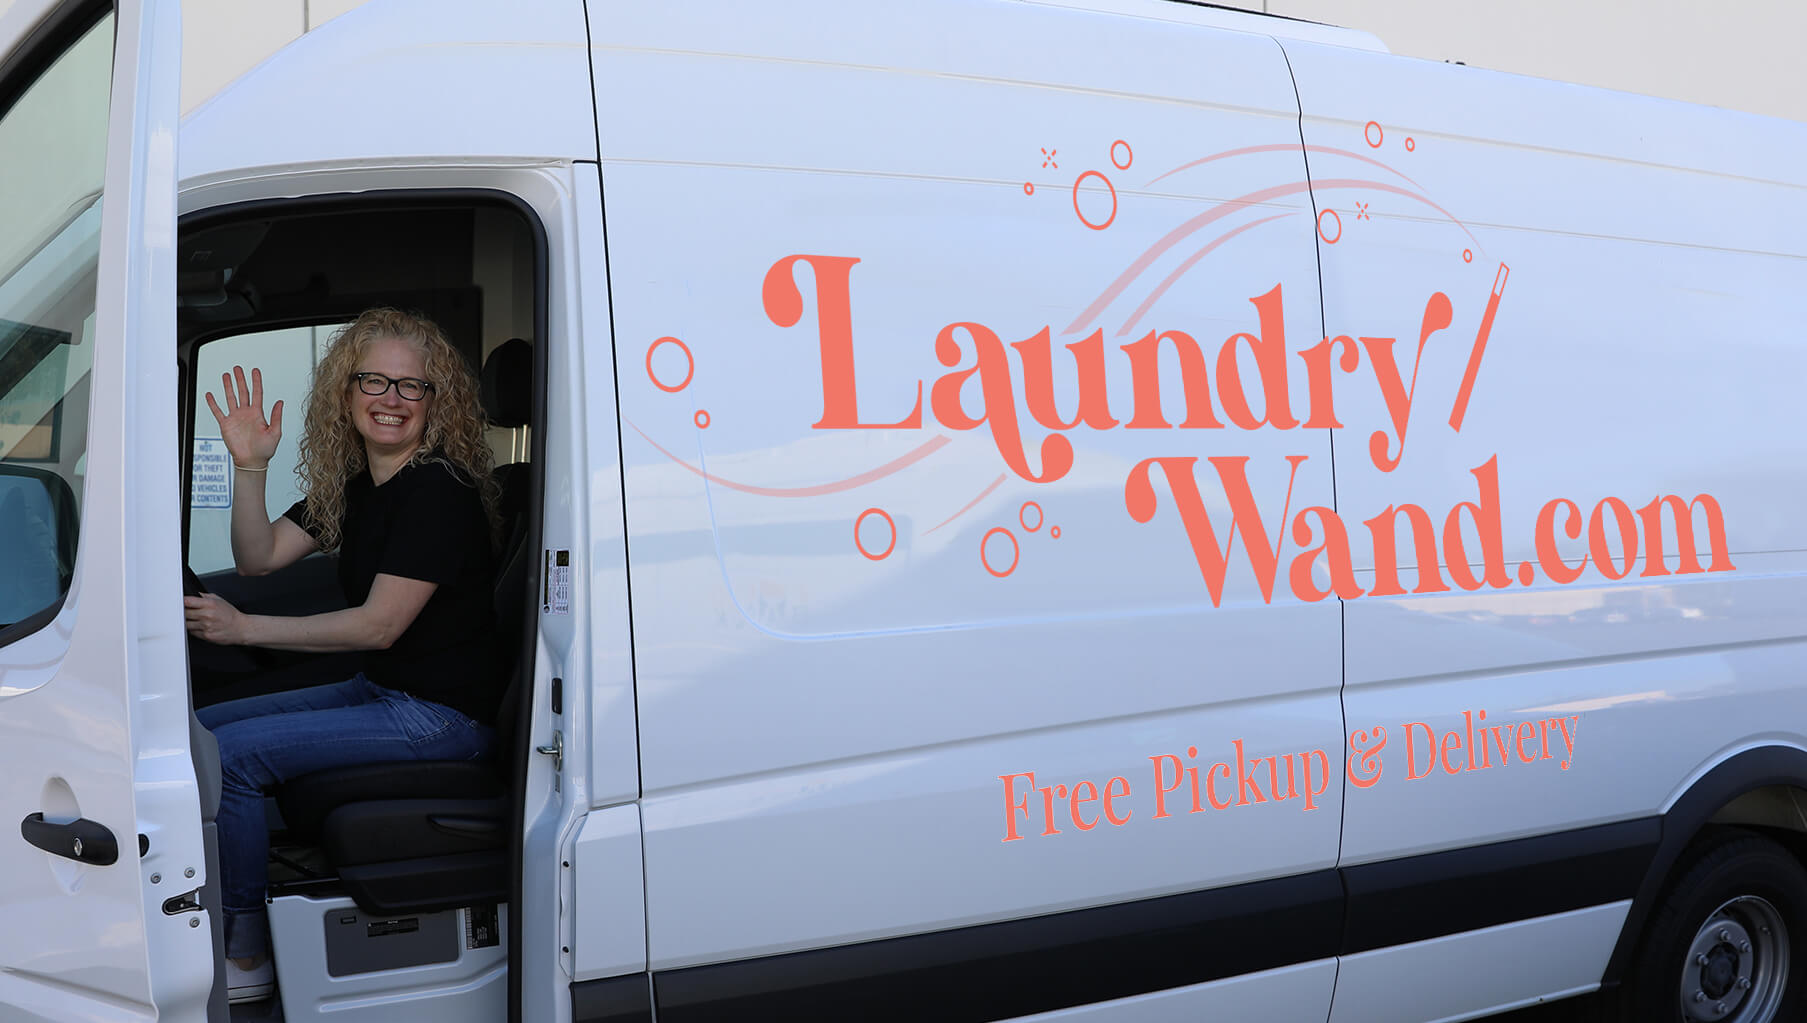 Laundry Wand Laundry Pickup and Delivery Service Van Driver